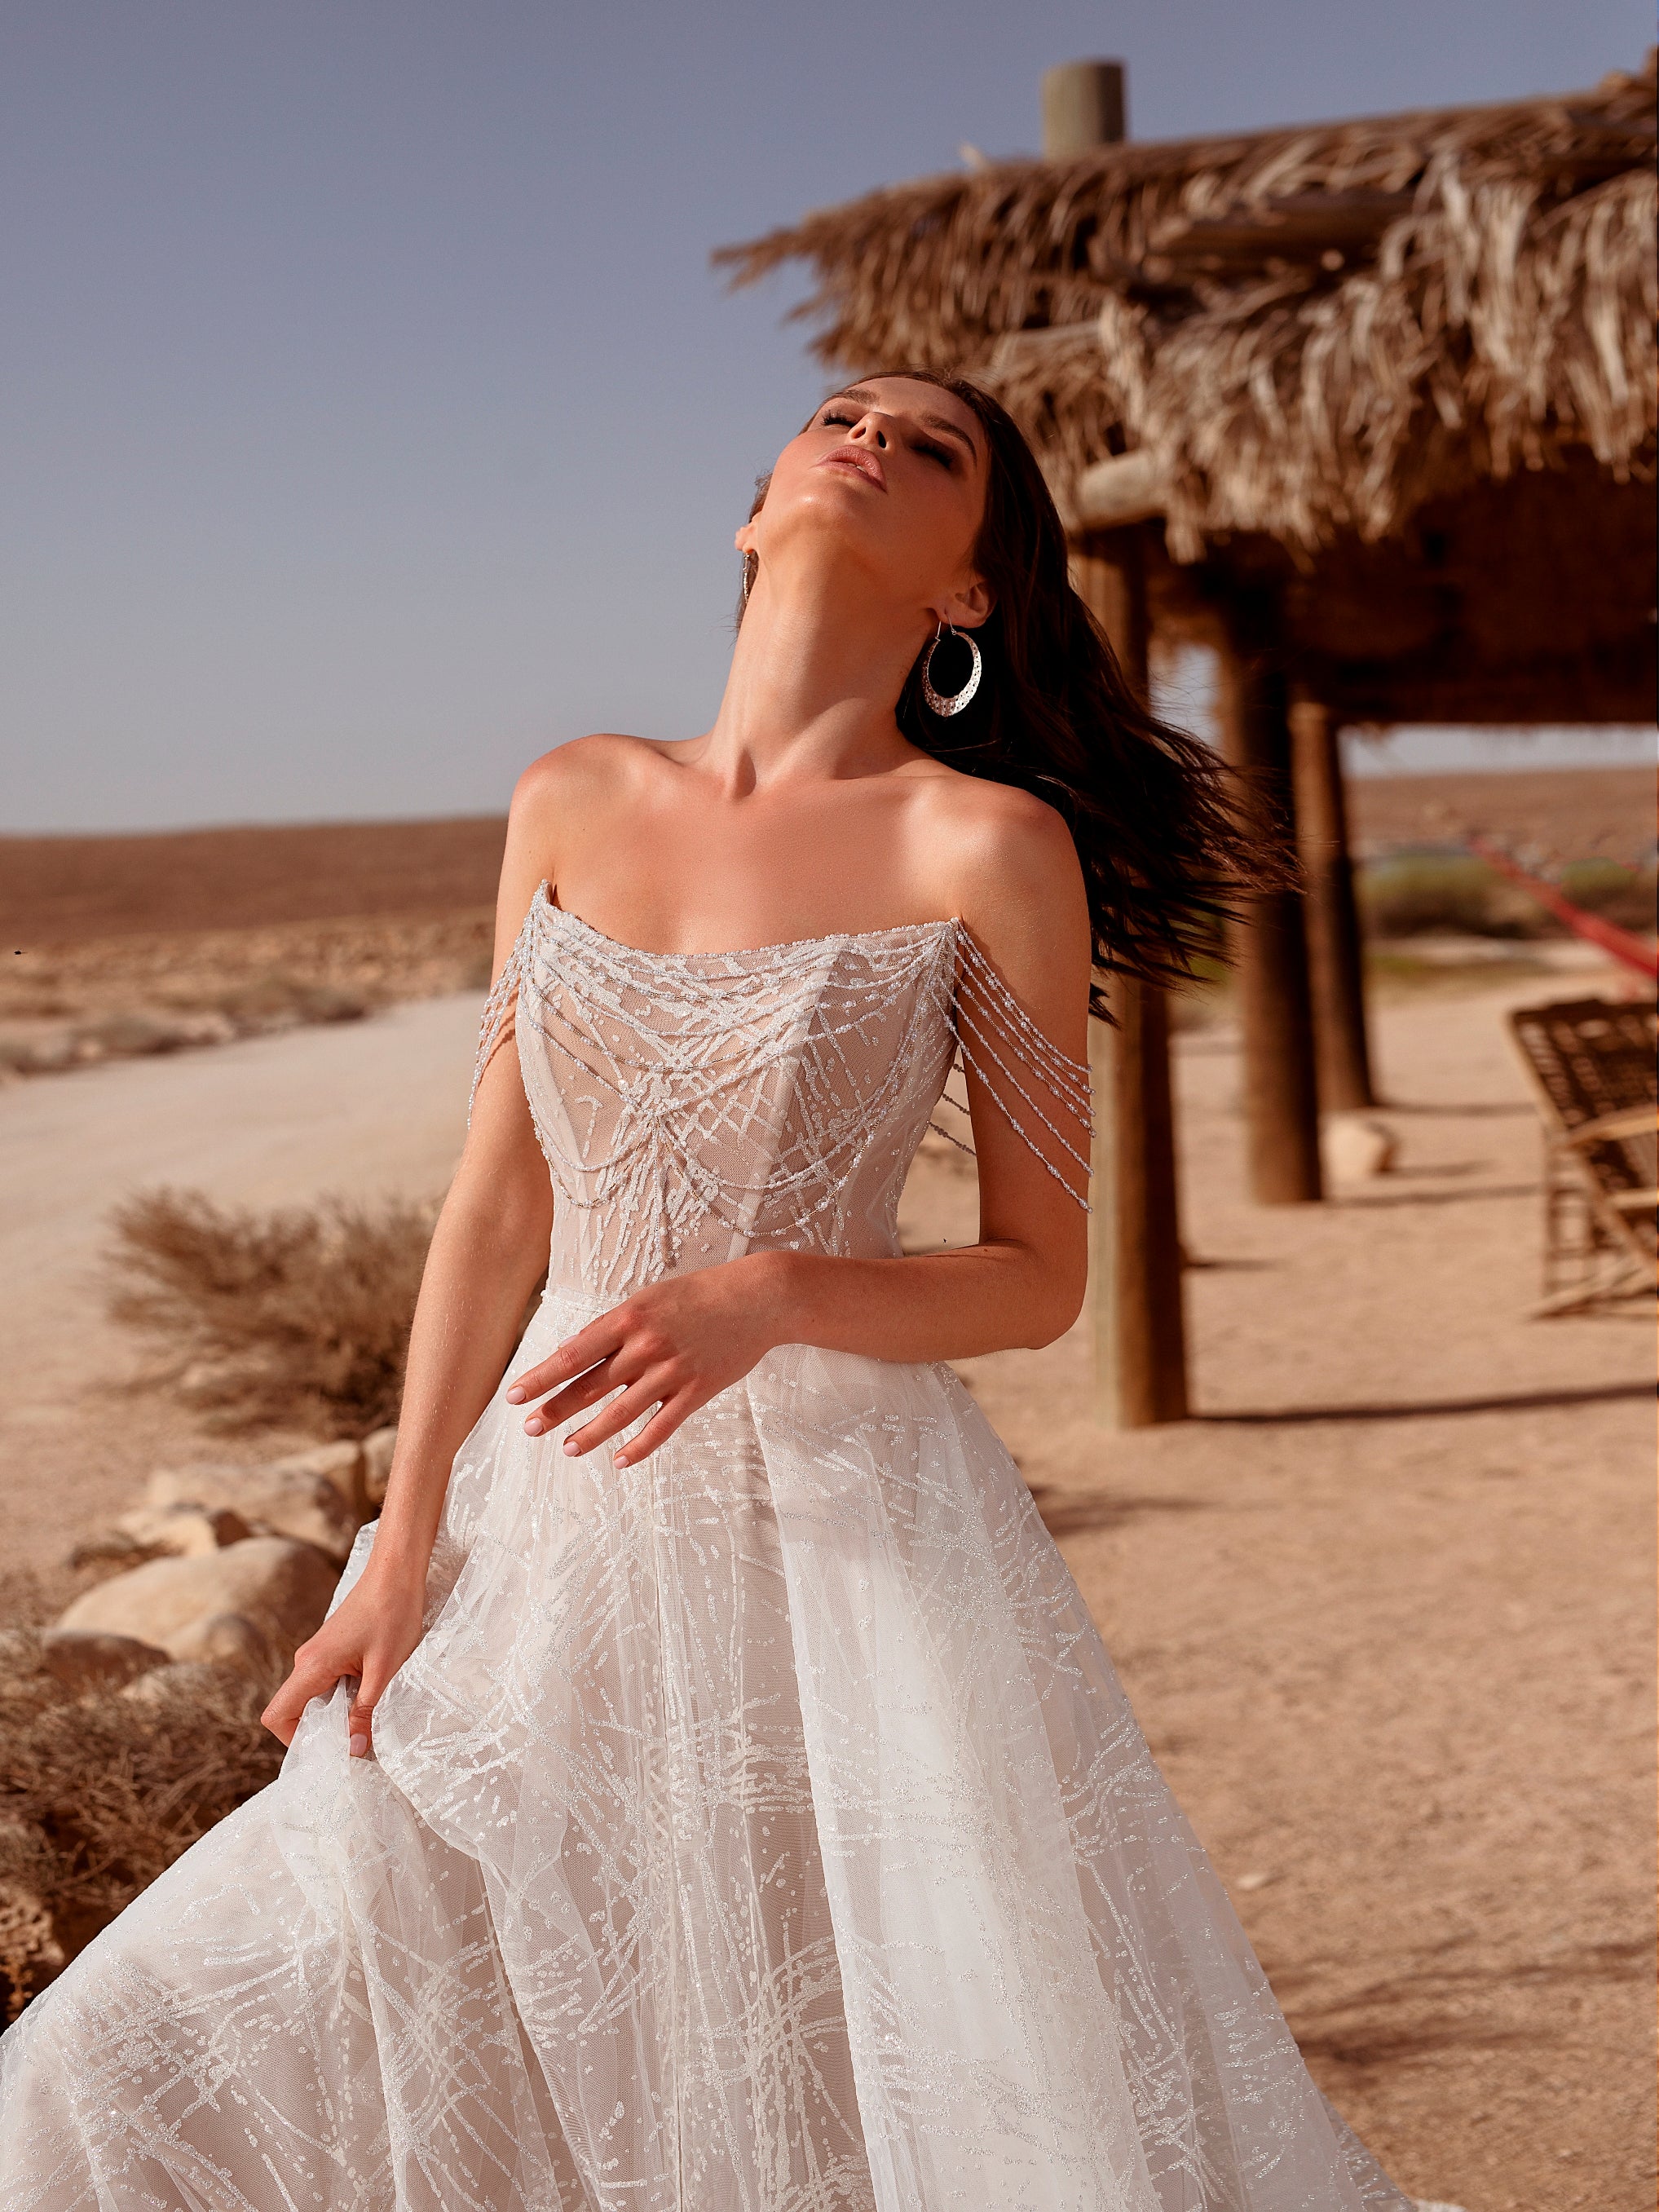 Glitter Wedding Gown with Delicate Beaded Straps – HAREM's Brides